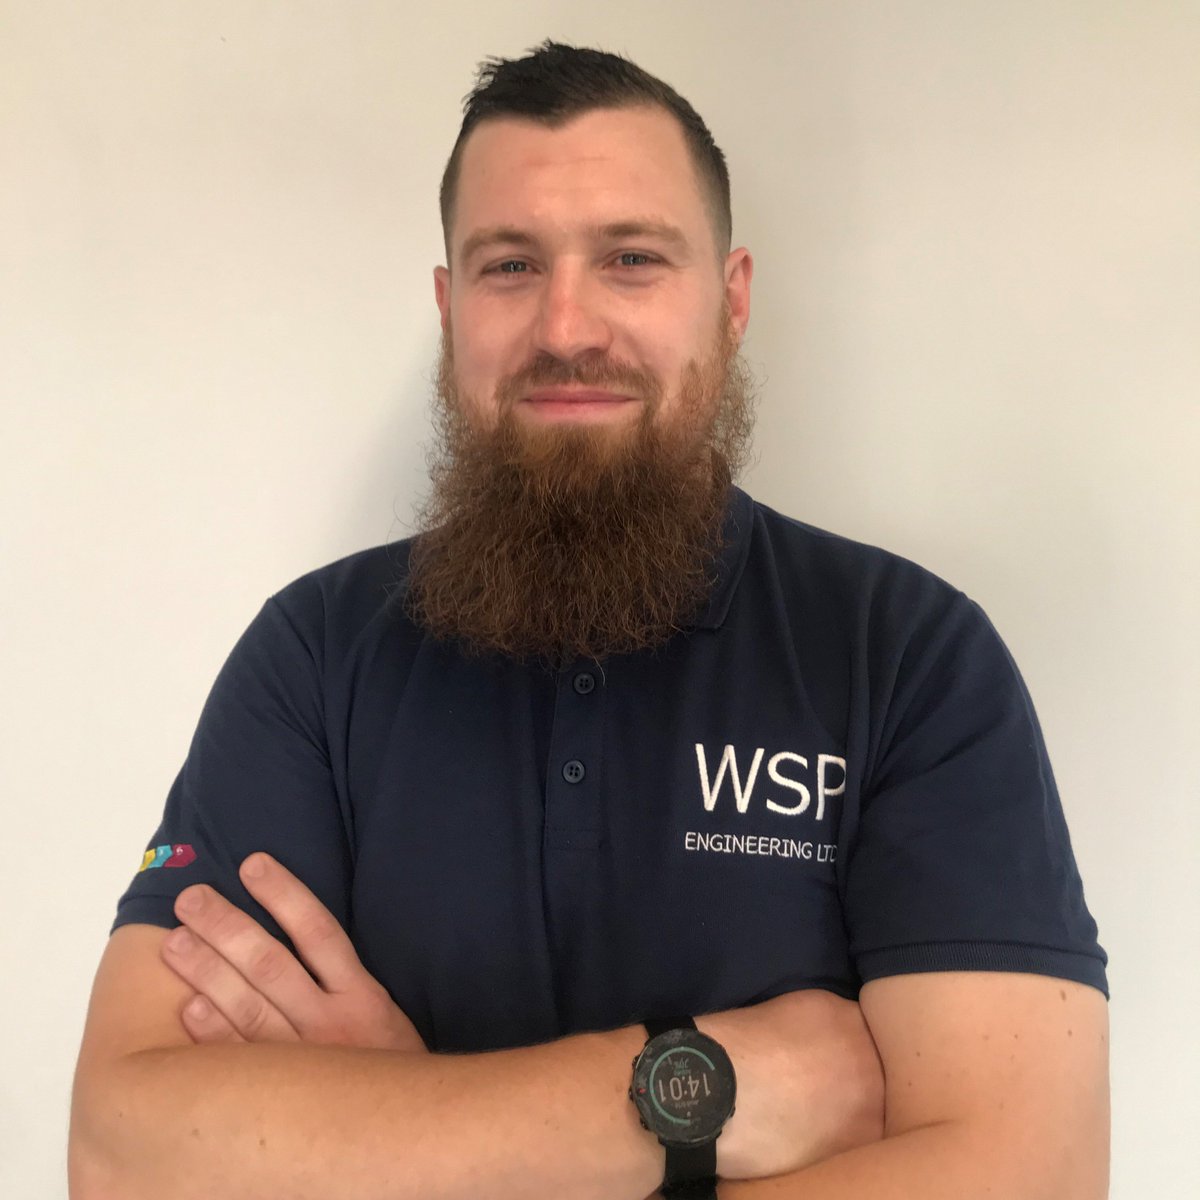 We are pleased to announce that Remy Sogny has been promoted to the position of HSE Manager.

Congratulations Remy, well deserved.

#wsp #engineering #projectmanagement #hse #hseprofessionals #hsejobs #hsemanager